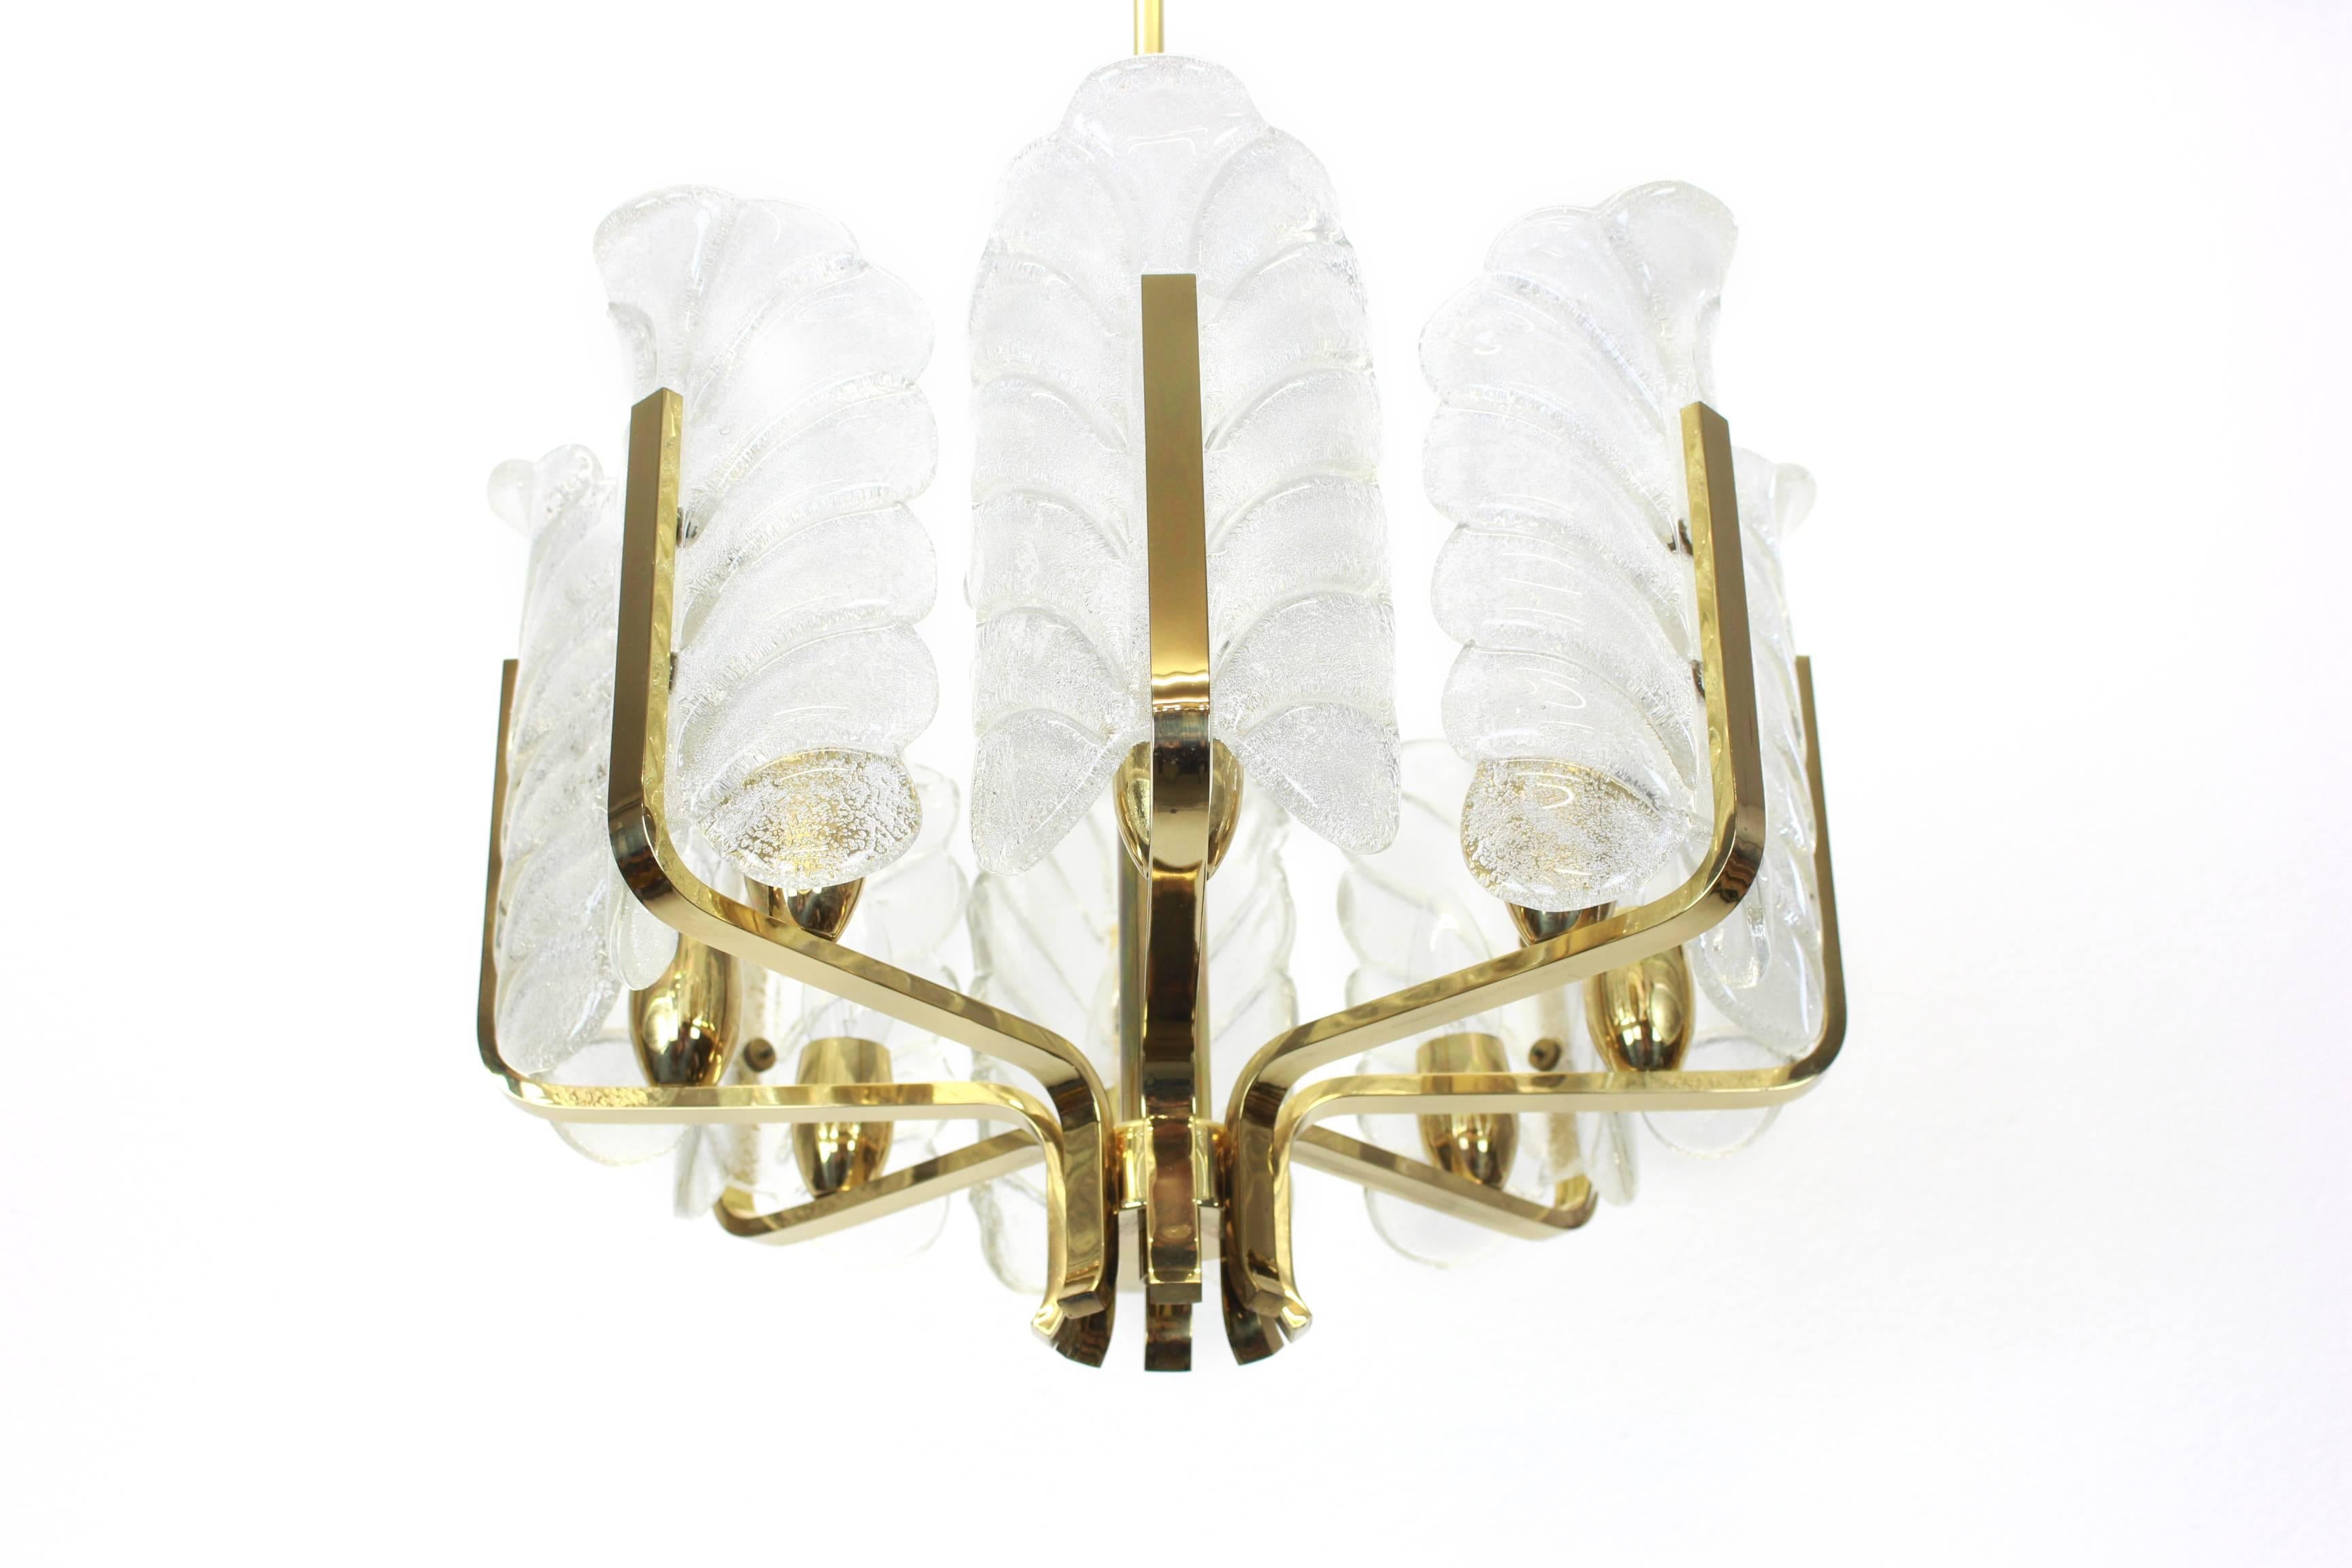 Very glamorous chandelier designed by Carl Fagerlund for Orrefors glass, Sweden, manufactured in midcentury, circa 1960-1969. The light features a polished brass frame with eight stunning Murano glass leaves which have a matte frosted relief on the